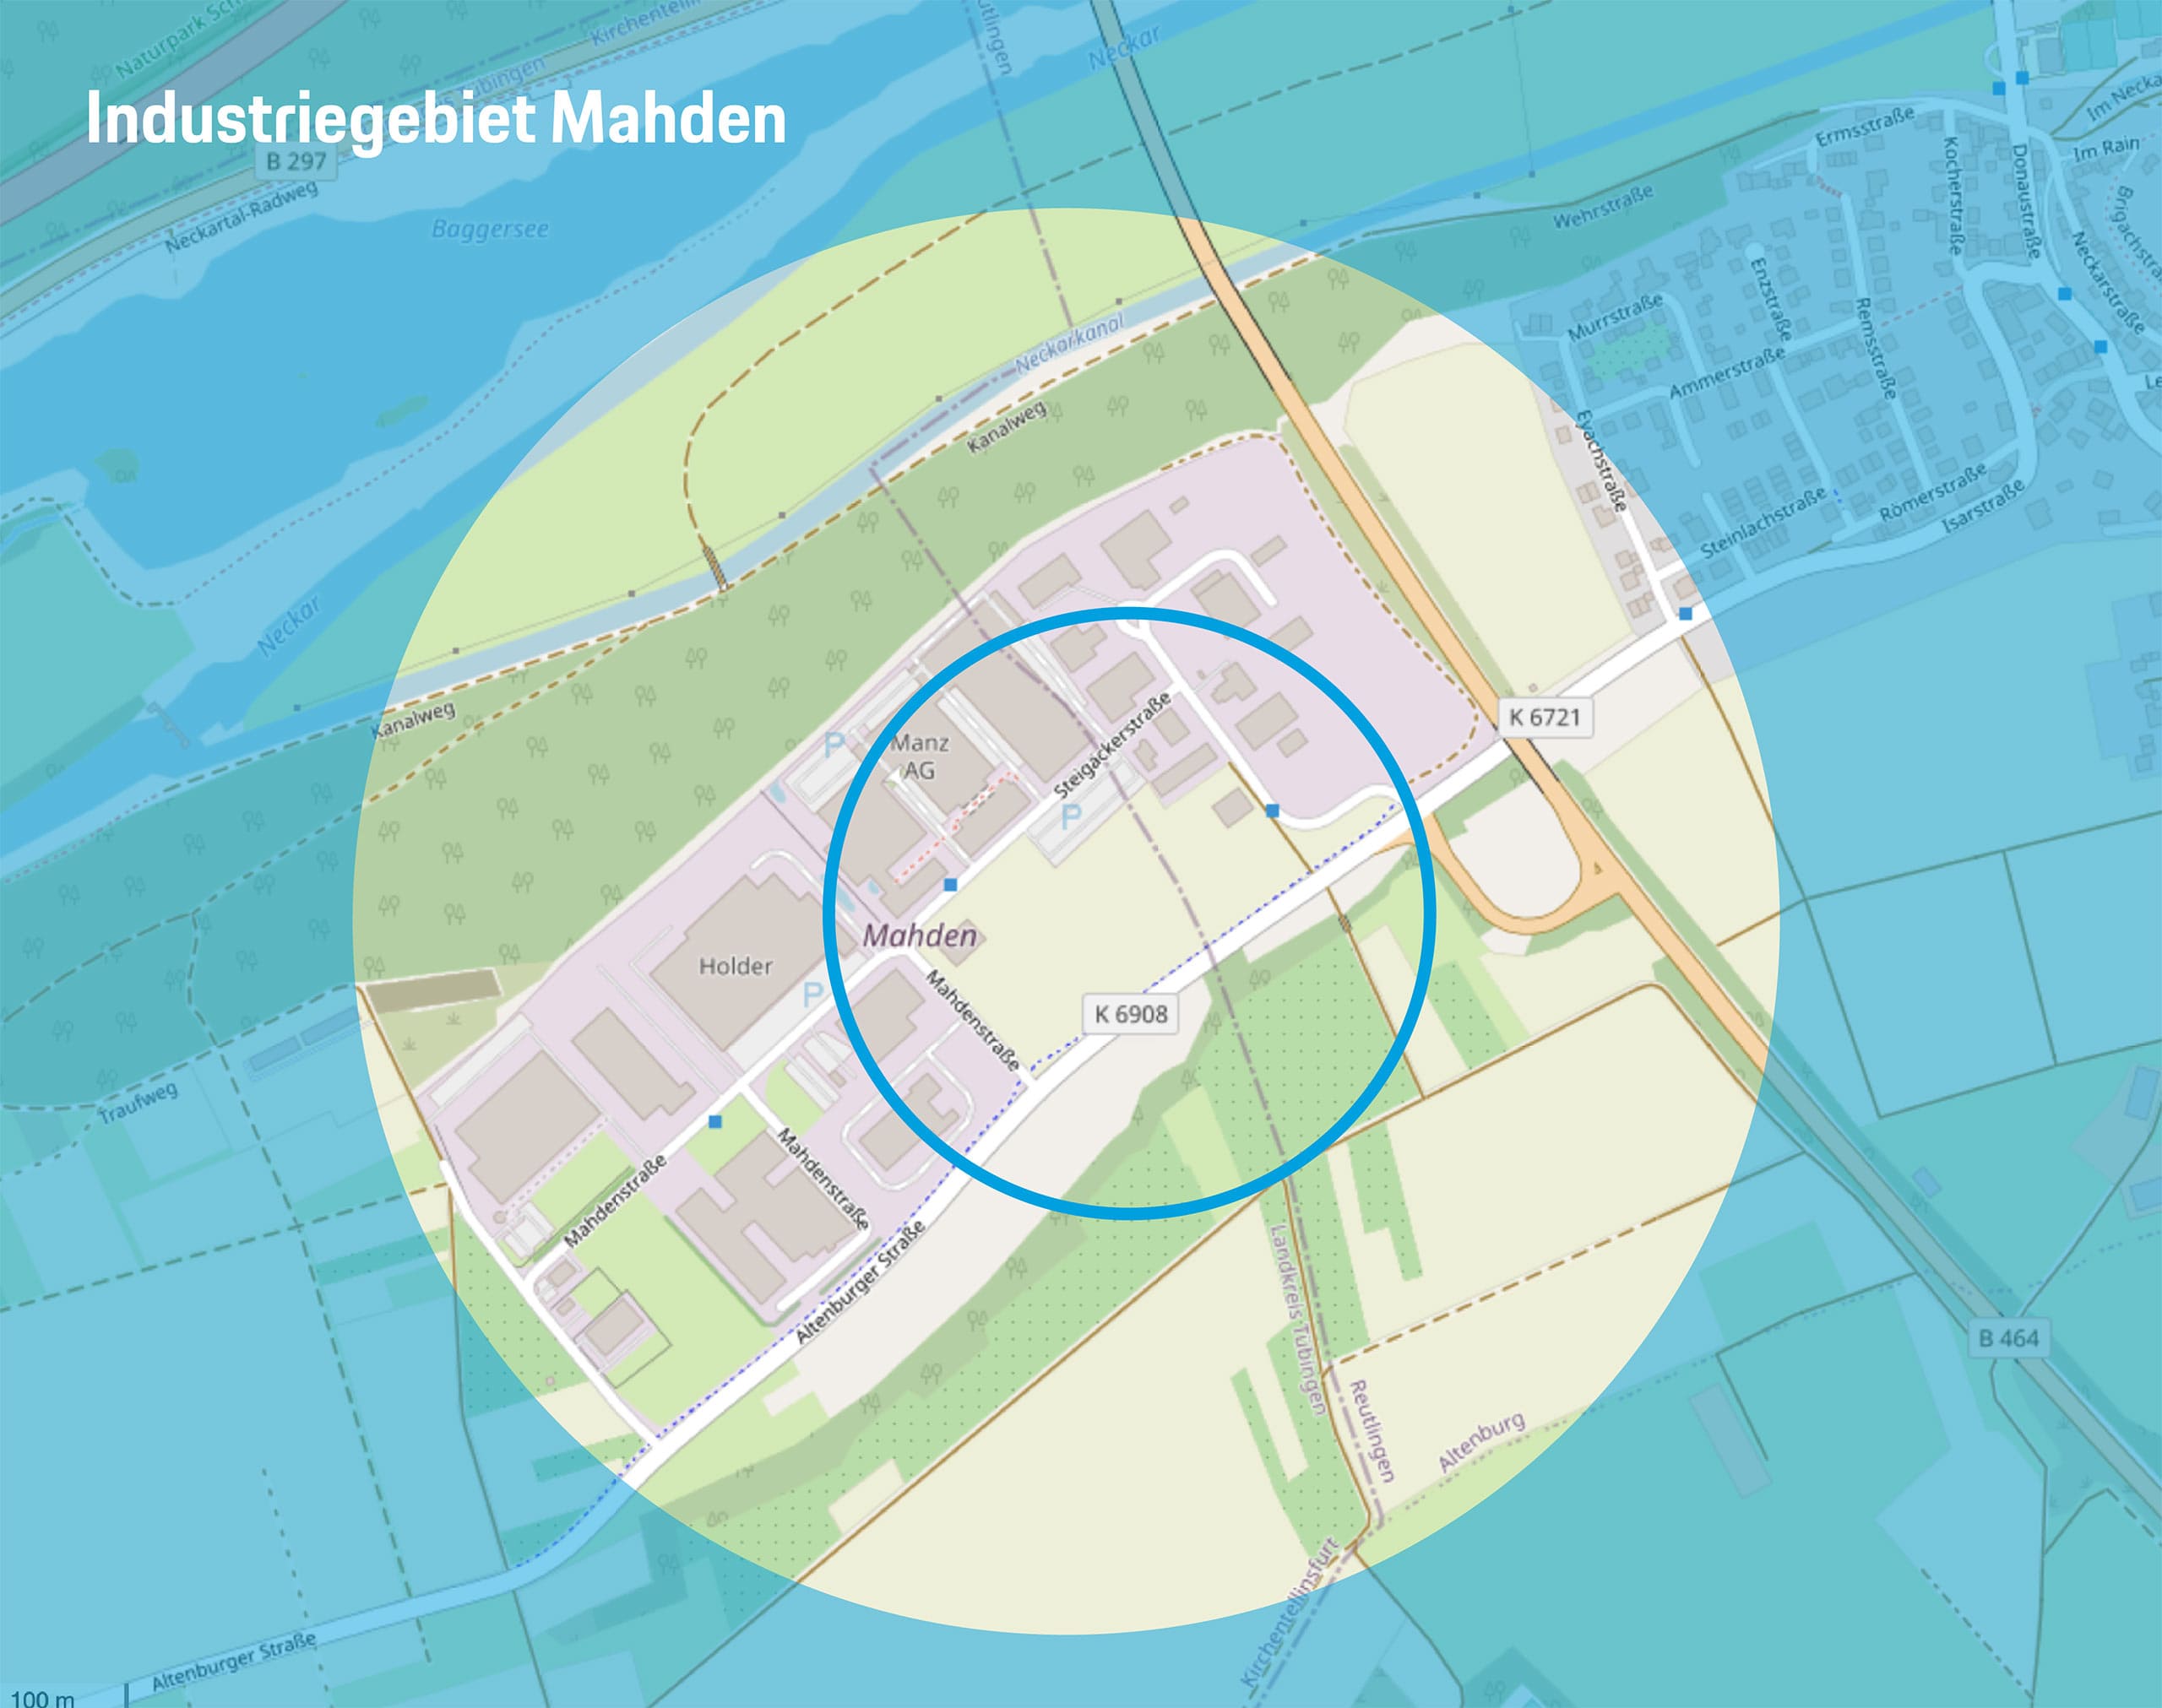 Map of the Mahden industrial park with the new production site